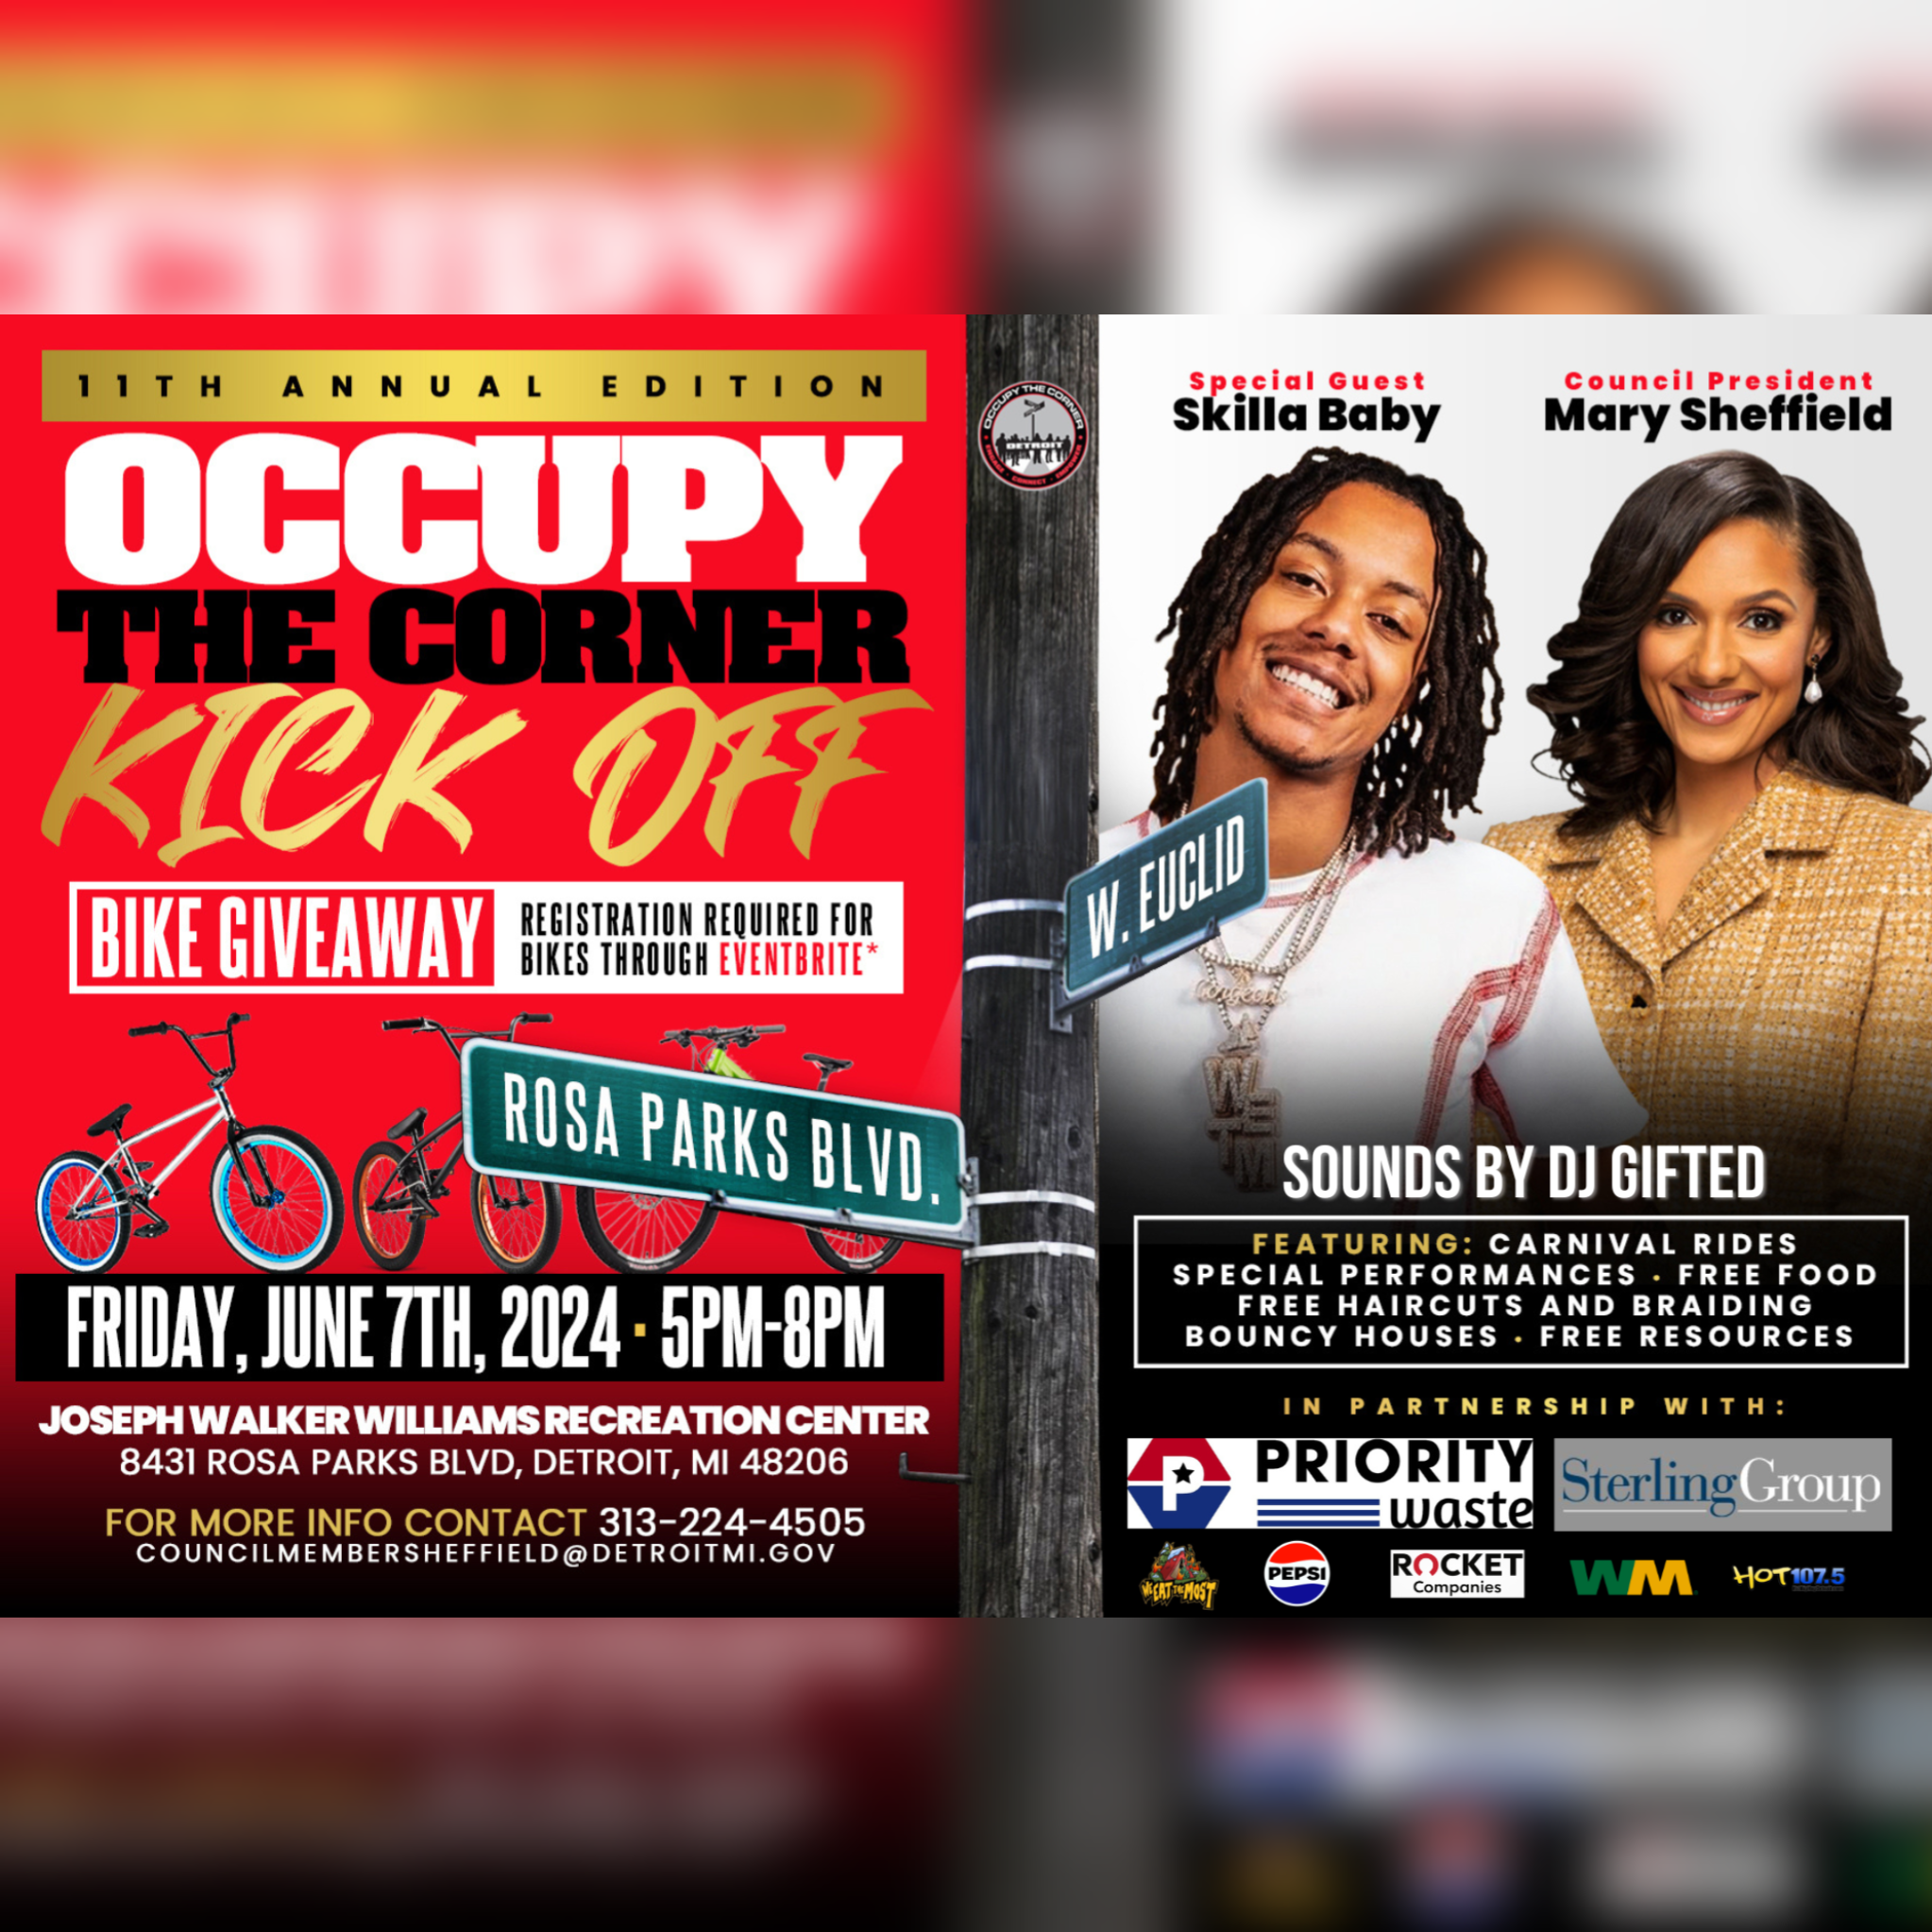 Council President Mary Sheffield's 11th Annual Occupy the Corner - Detroit Kick-off with special guest Skilla Baby | June 7th from 5 pm - 8 pm at Joseph Walker Williams Recreation Center located at 8431 Rose Parks Blvd, Detroit, MI 48206